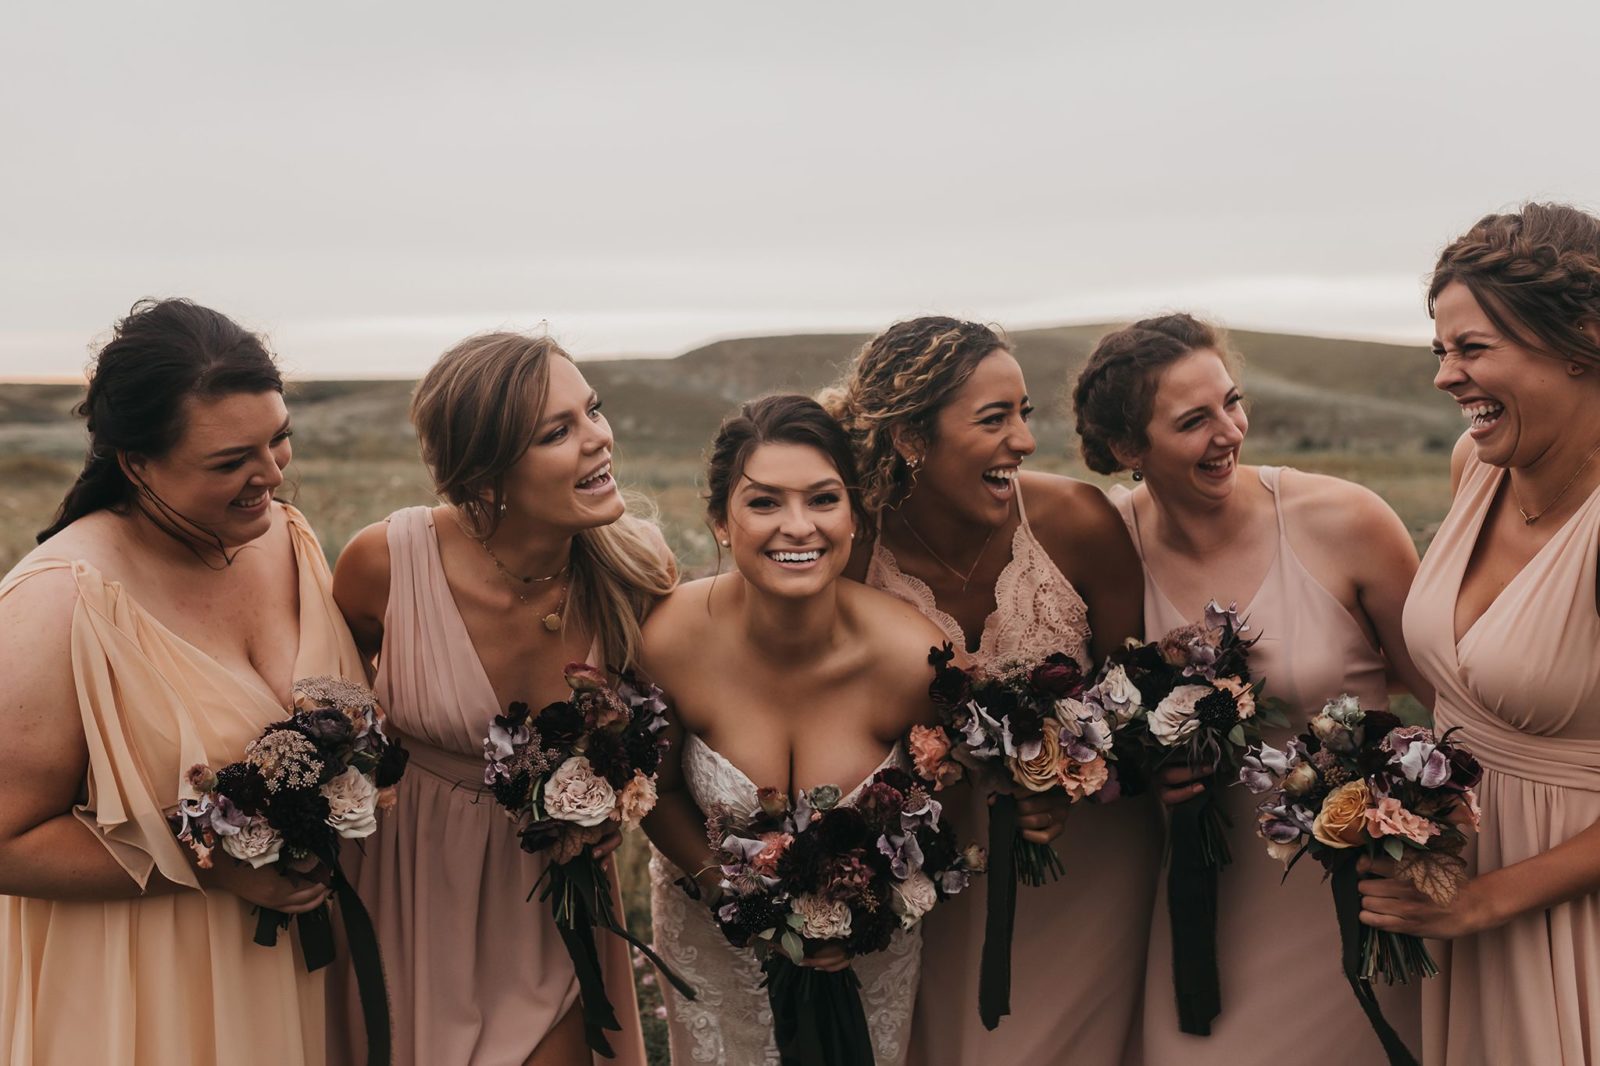 Real Wedding - Countryside Nuptials & Moroccan Styled Reception - featured on Junebug and Bronte Bride, bridesmaids, bridal party photos